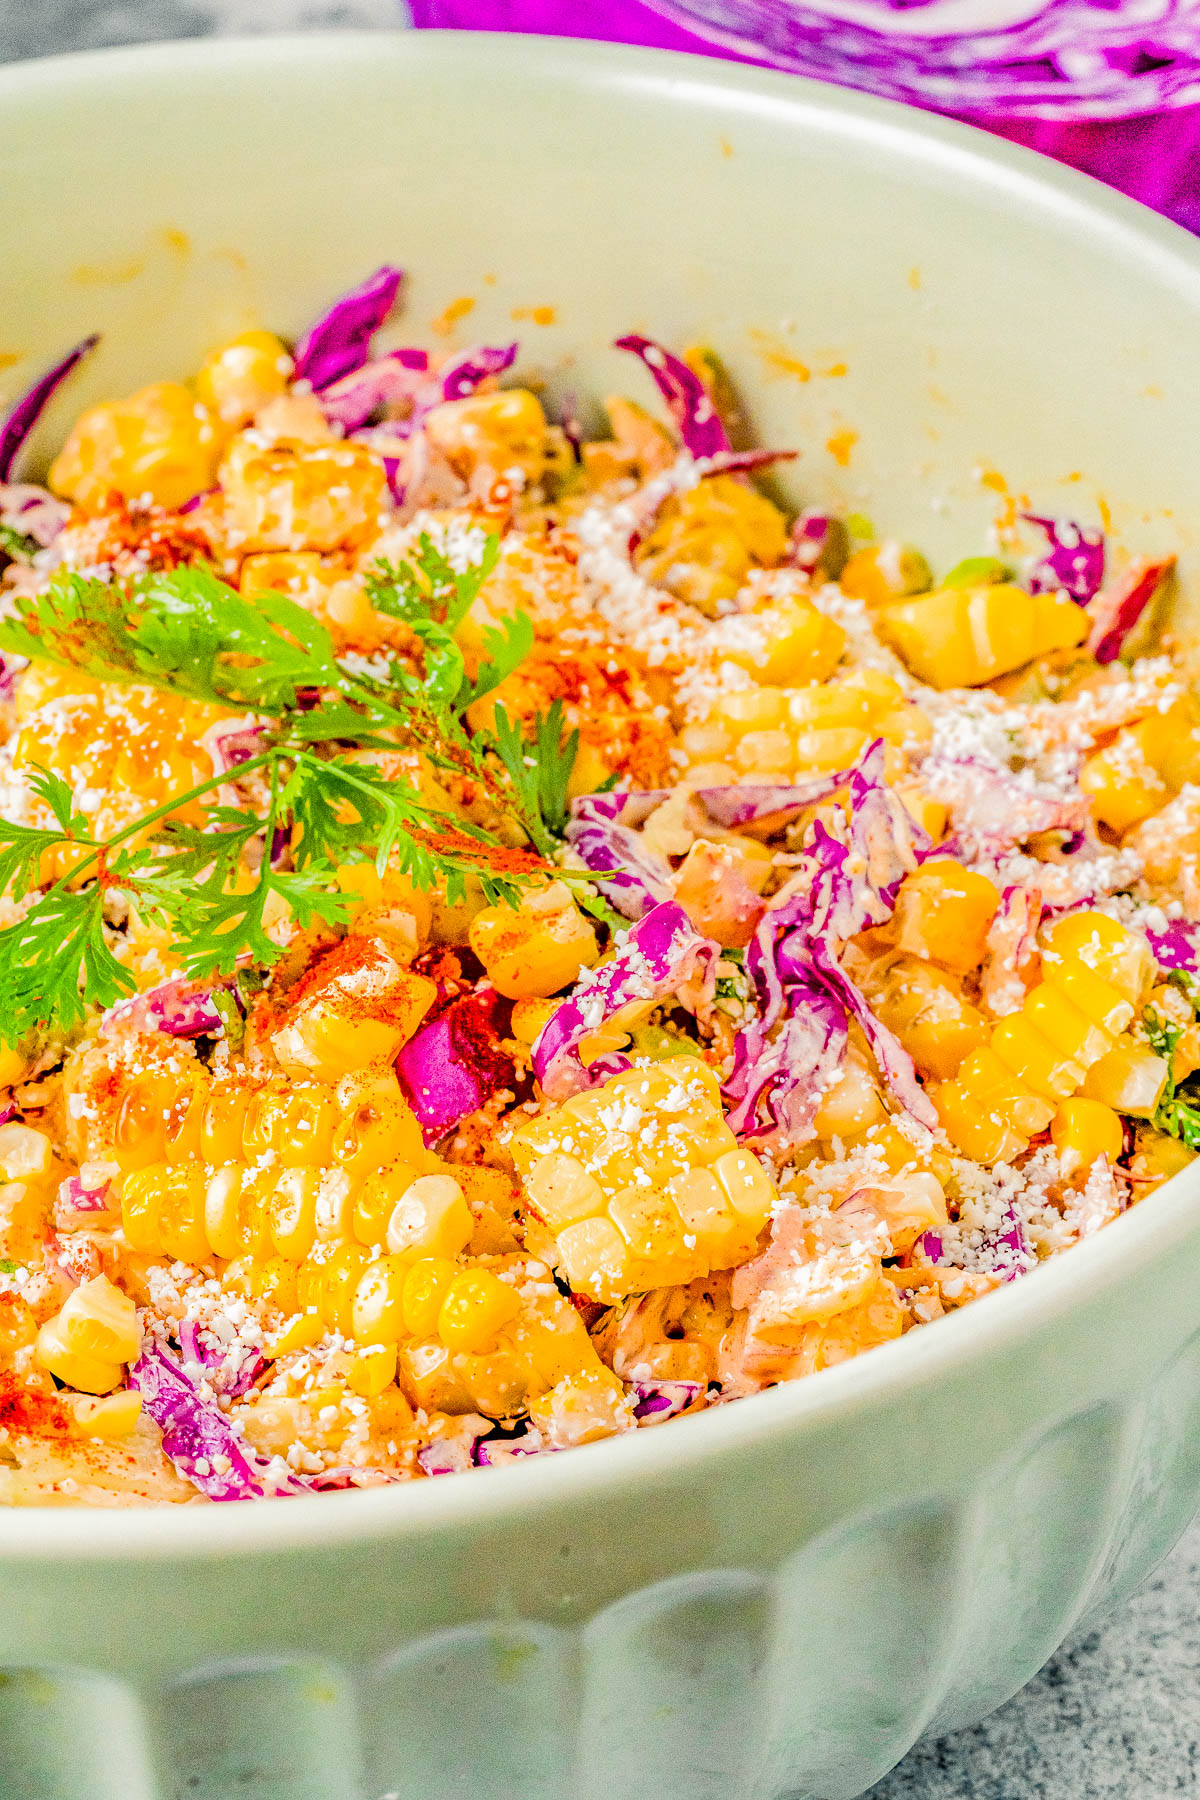 A vibrant bowl of salad with corn, red cabbage, herbs, and grated cheese, served in a white dish.